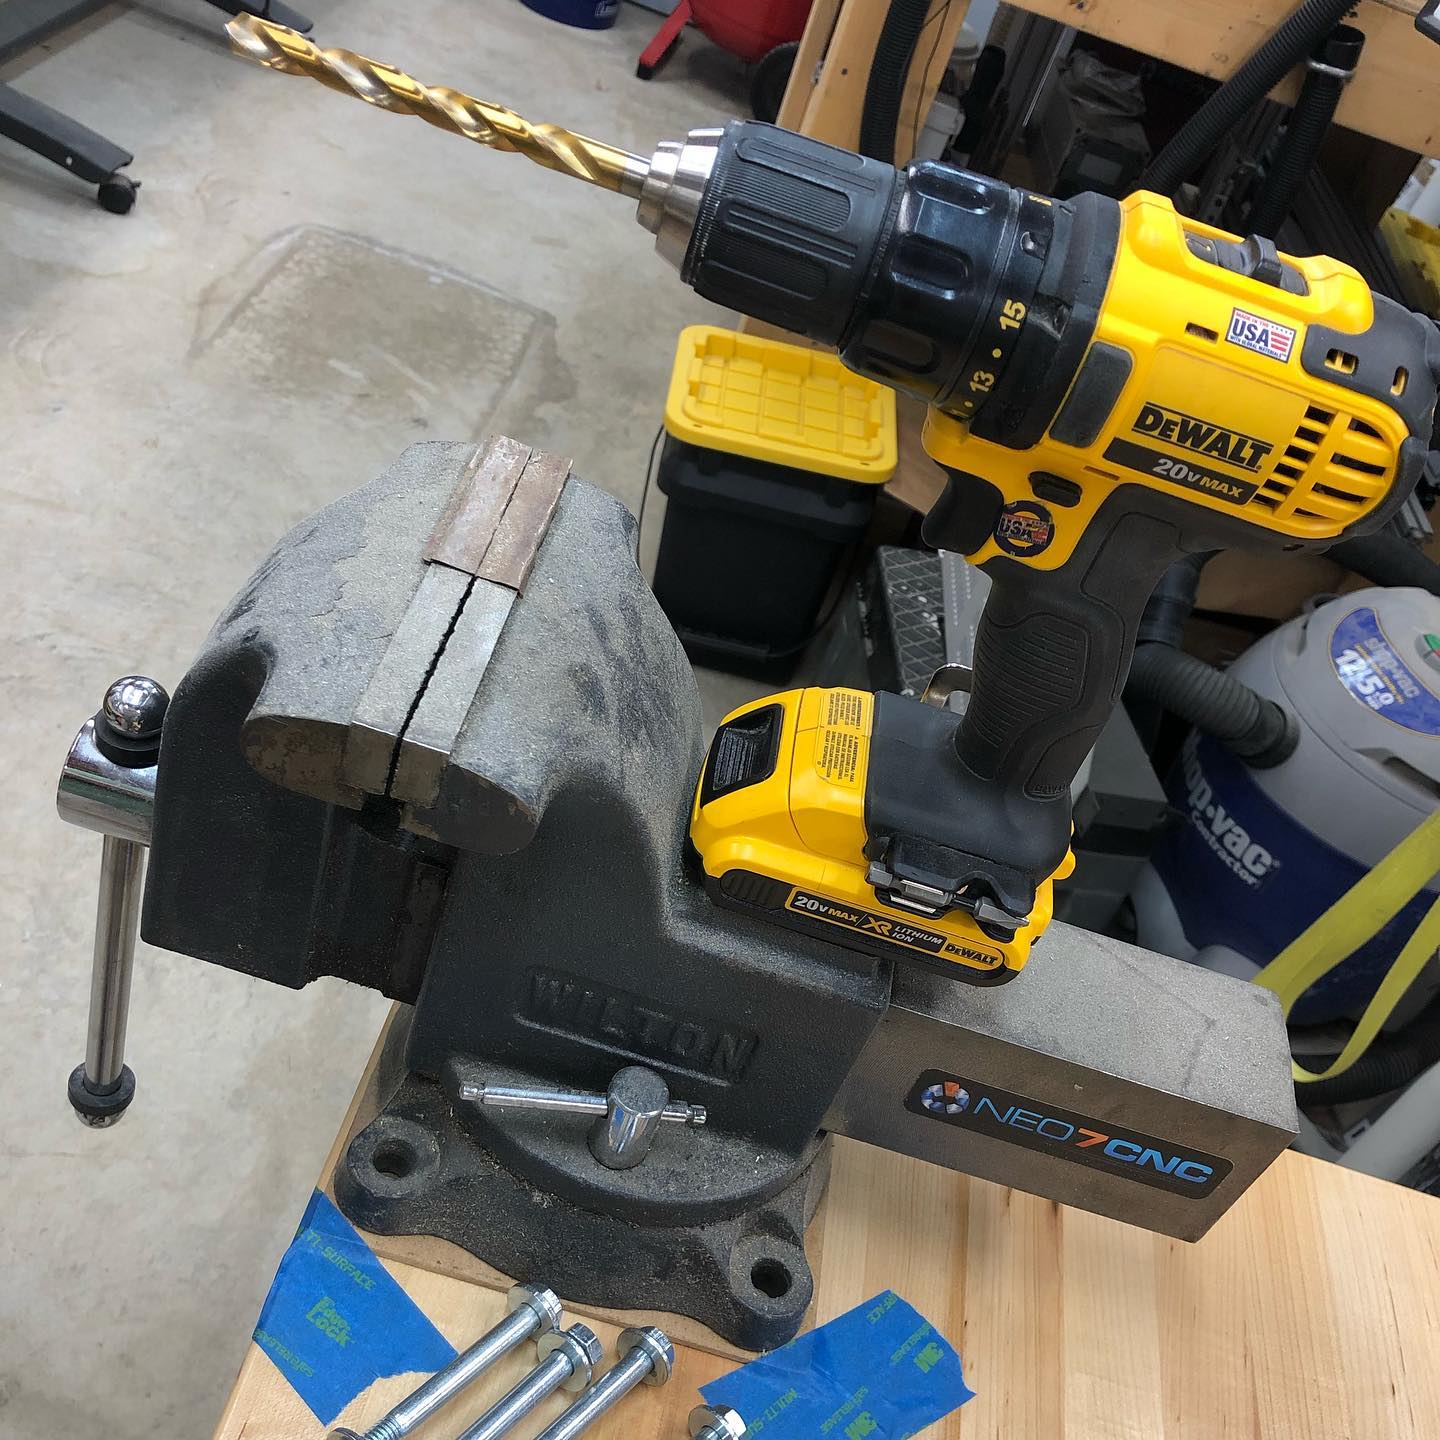 This is what true commitment looks like 😆. No more C clamps holding the vise to the workbench. #diy #diycnc #shoptime #maker #imake #workbench #workbenches #maple #dewalt